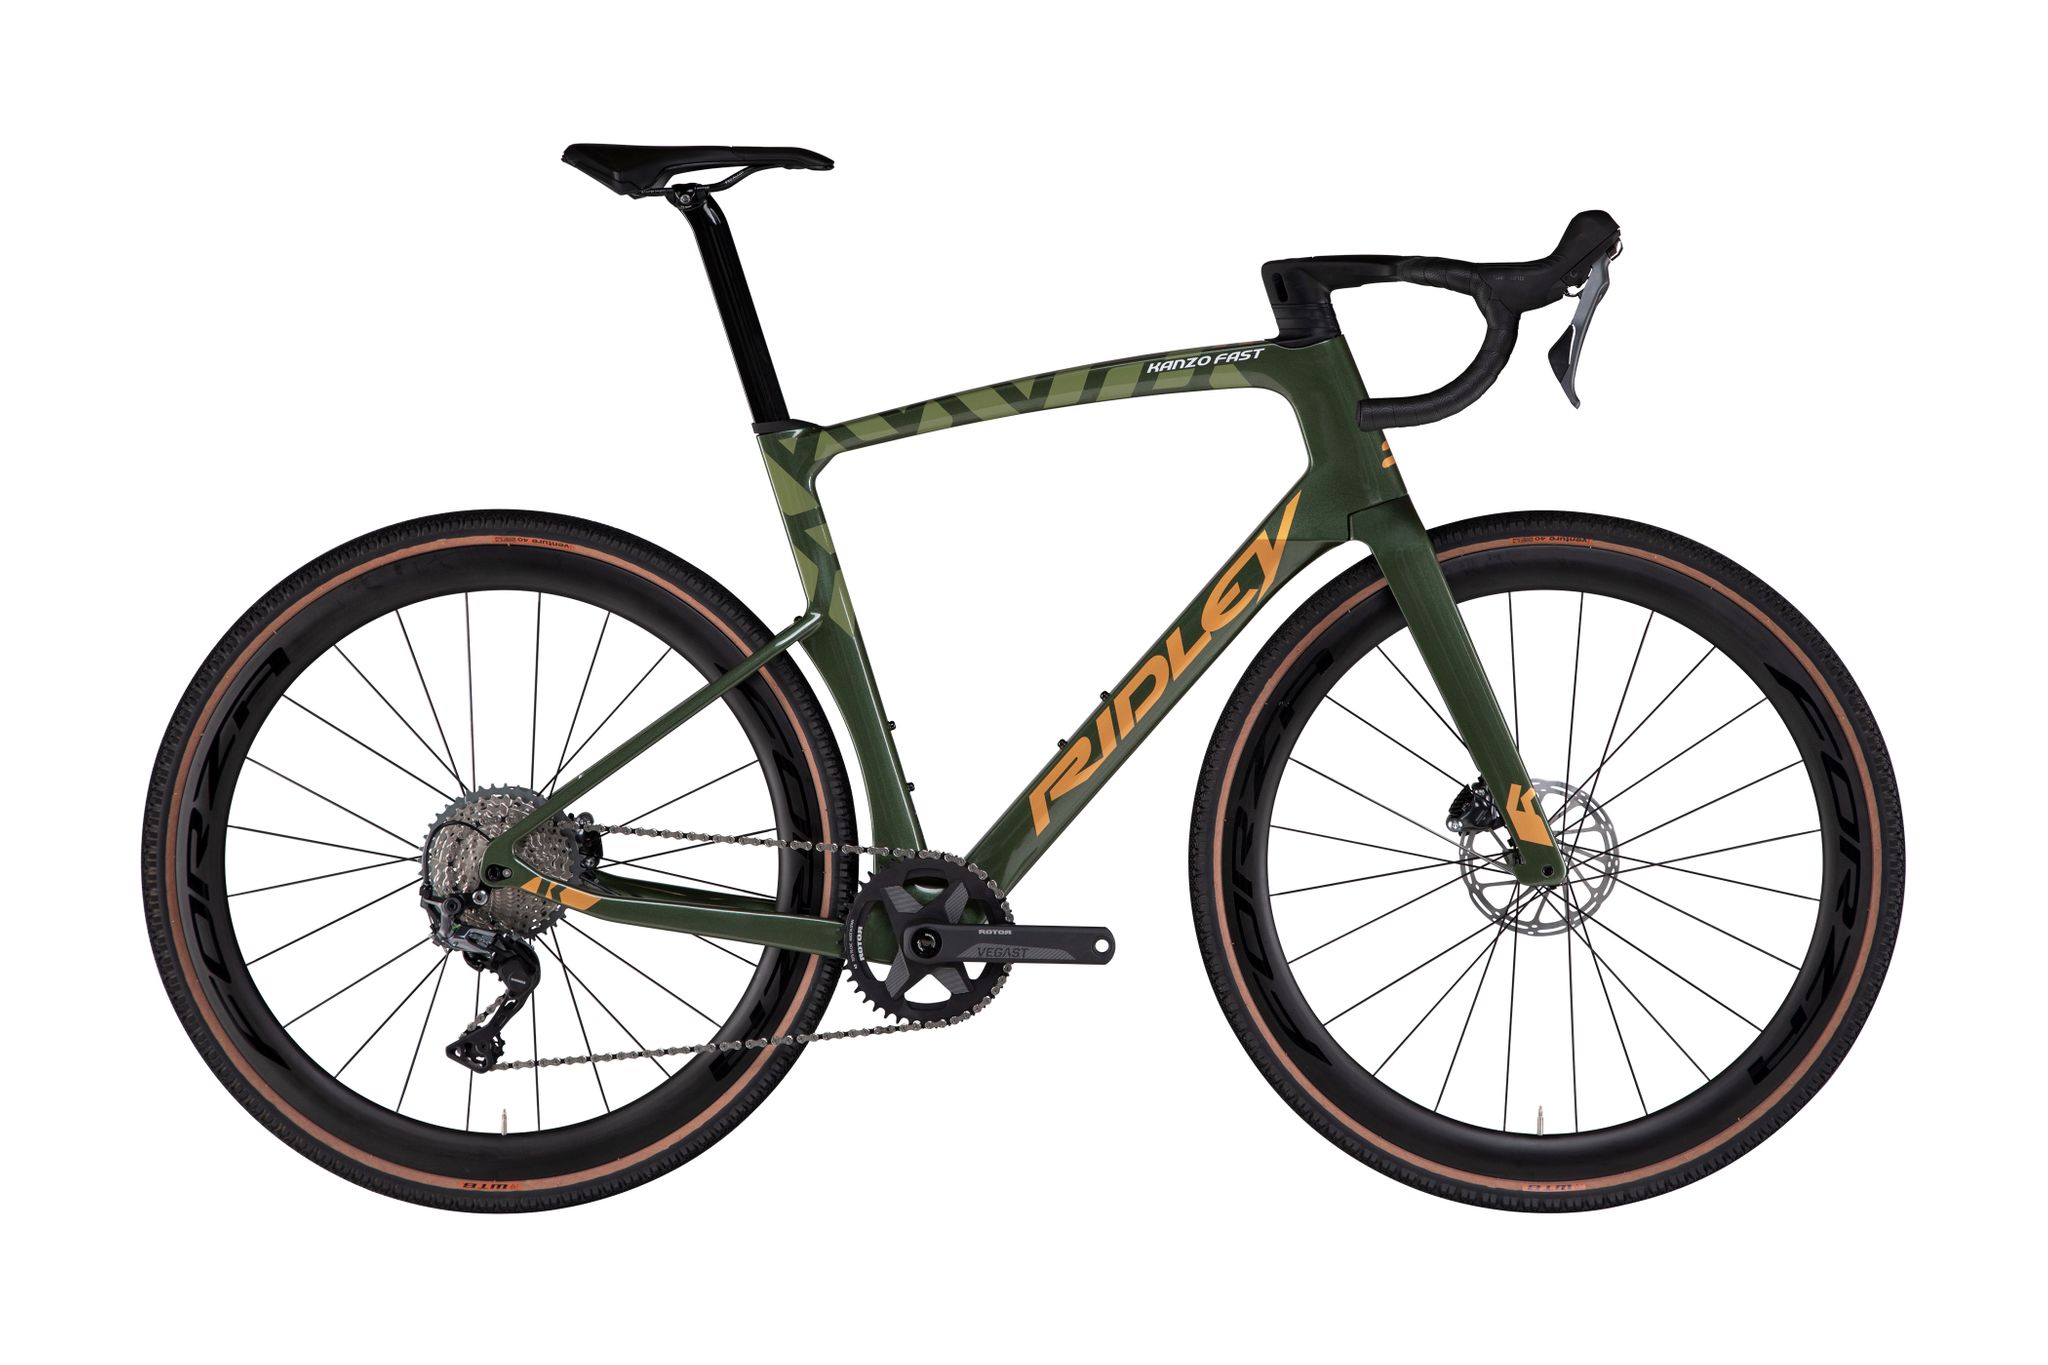 Ridley Kanzo Fast Complete bike